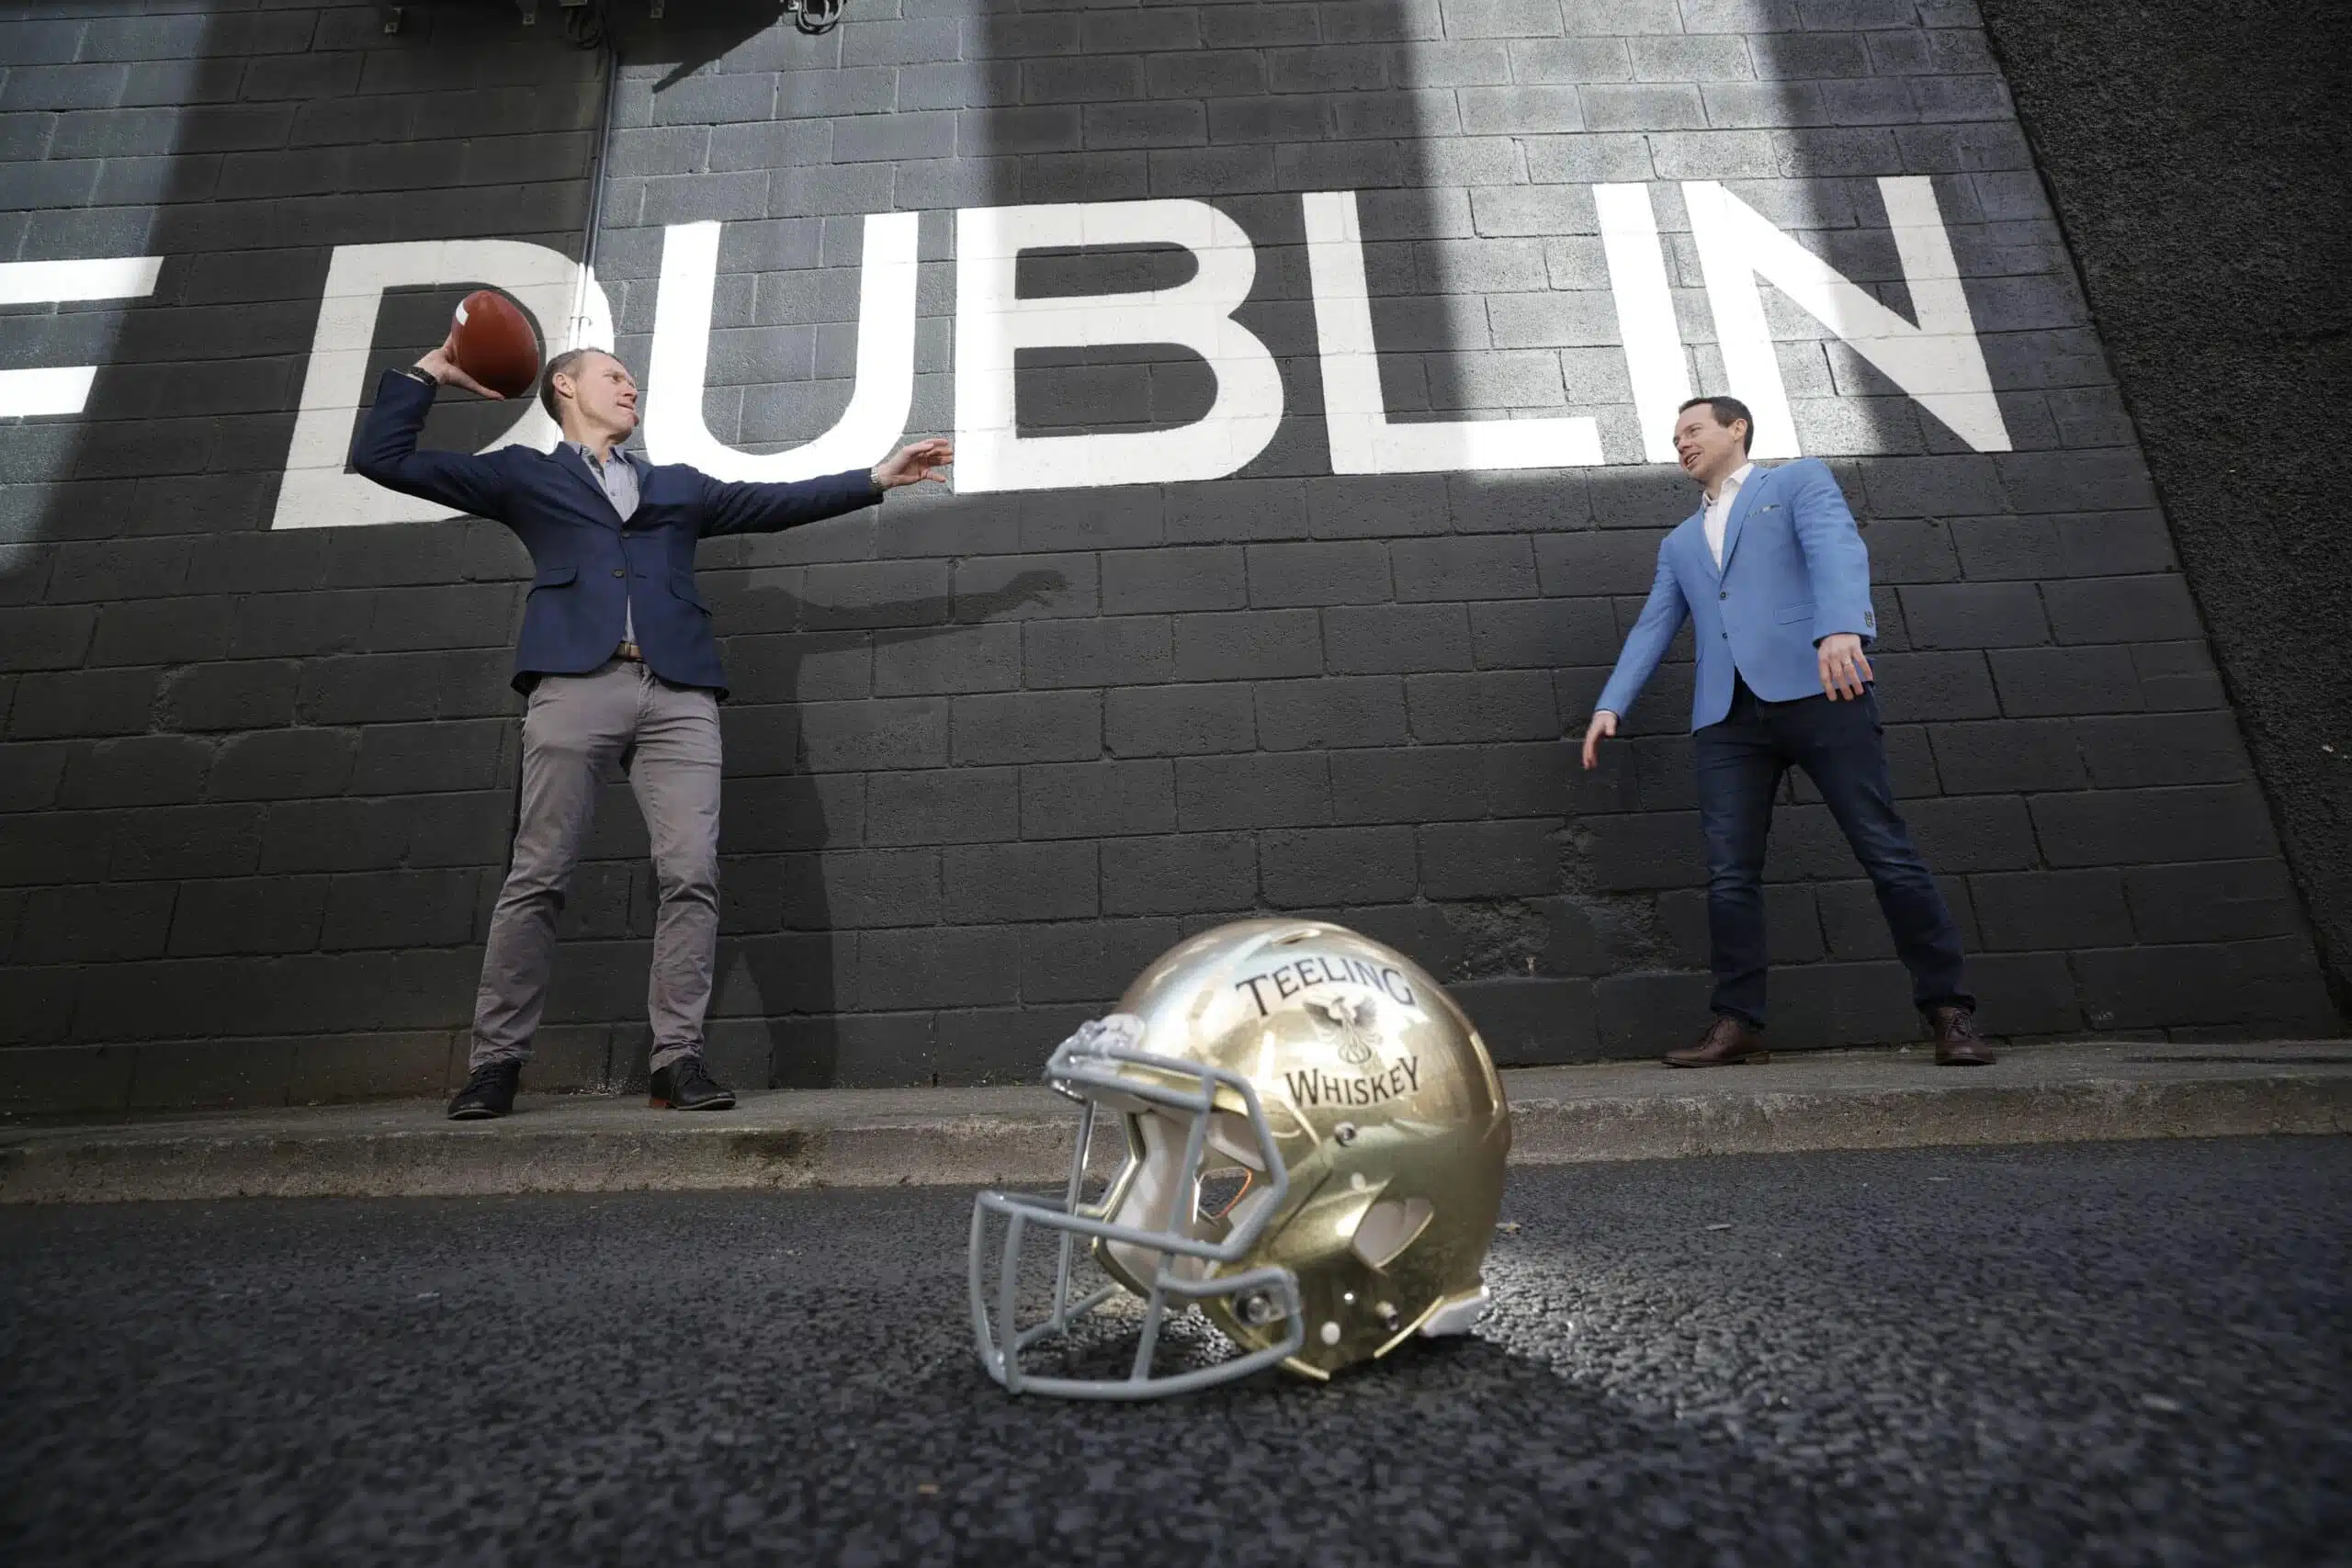 Teeling Irish Whiskey official partner of Aer Lingus College Football classic